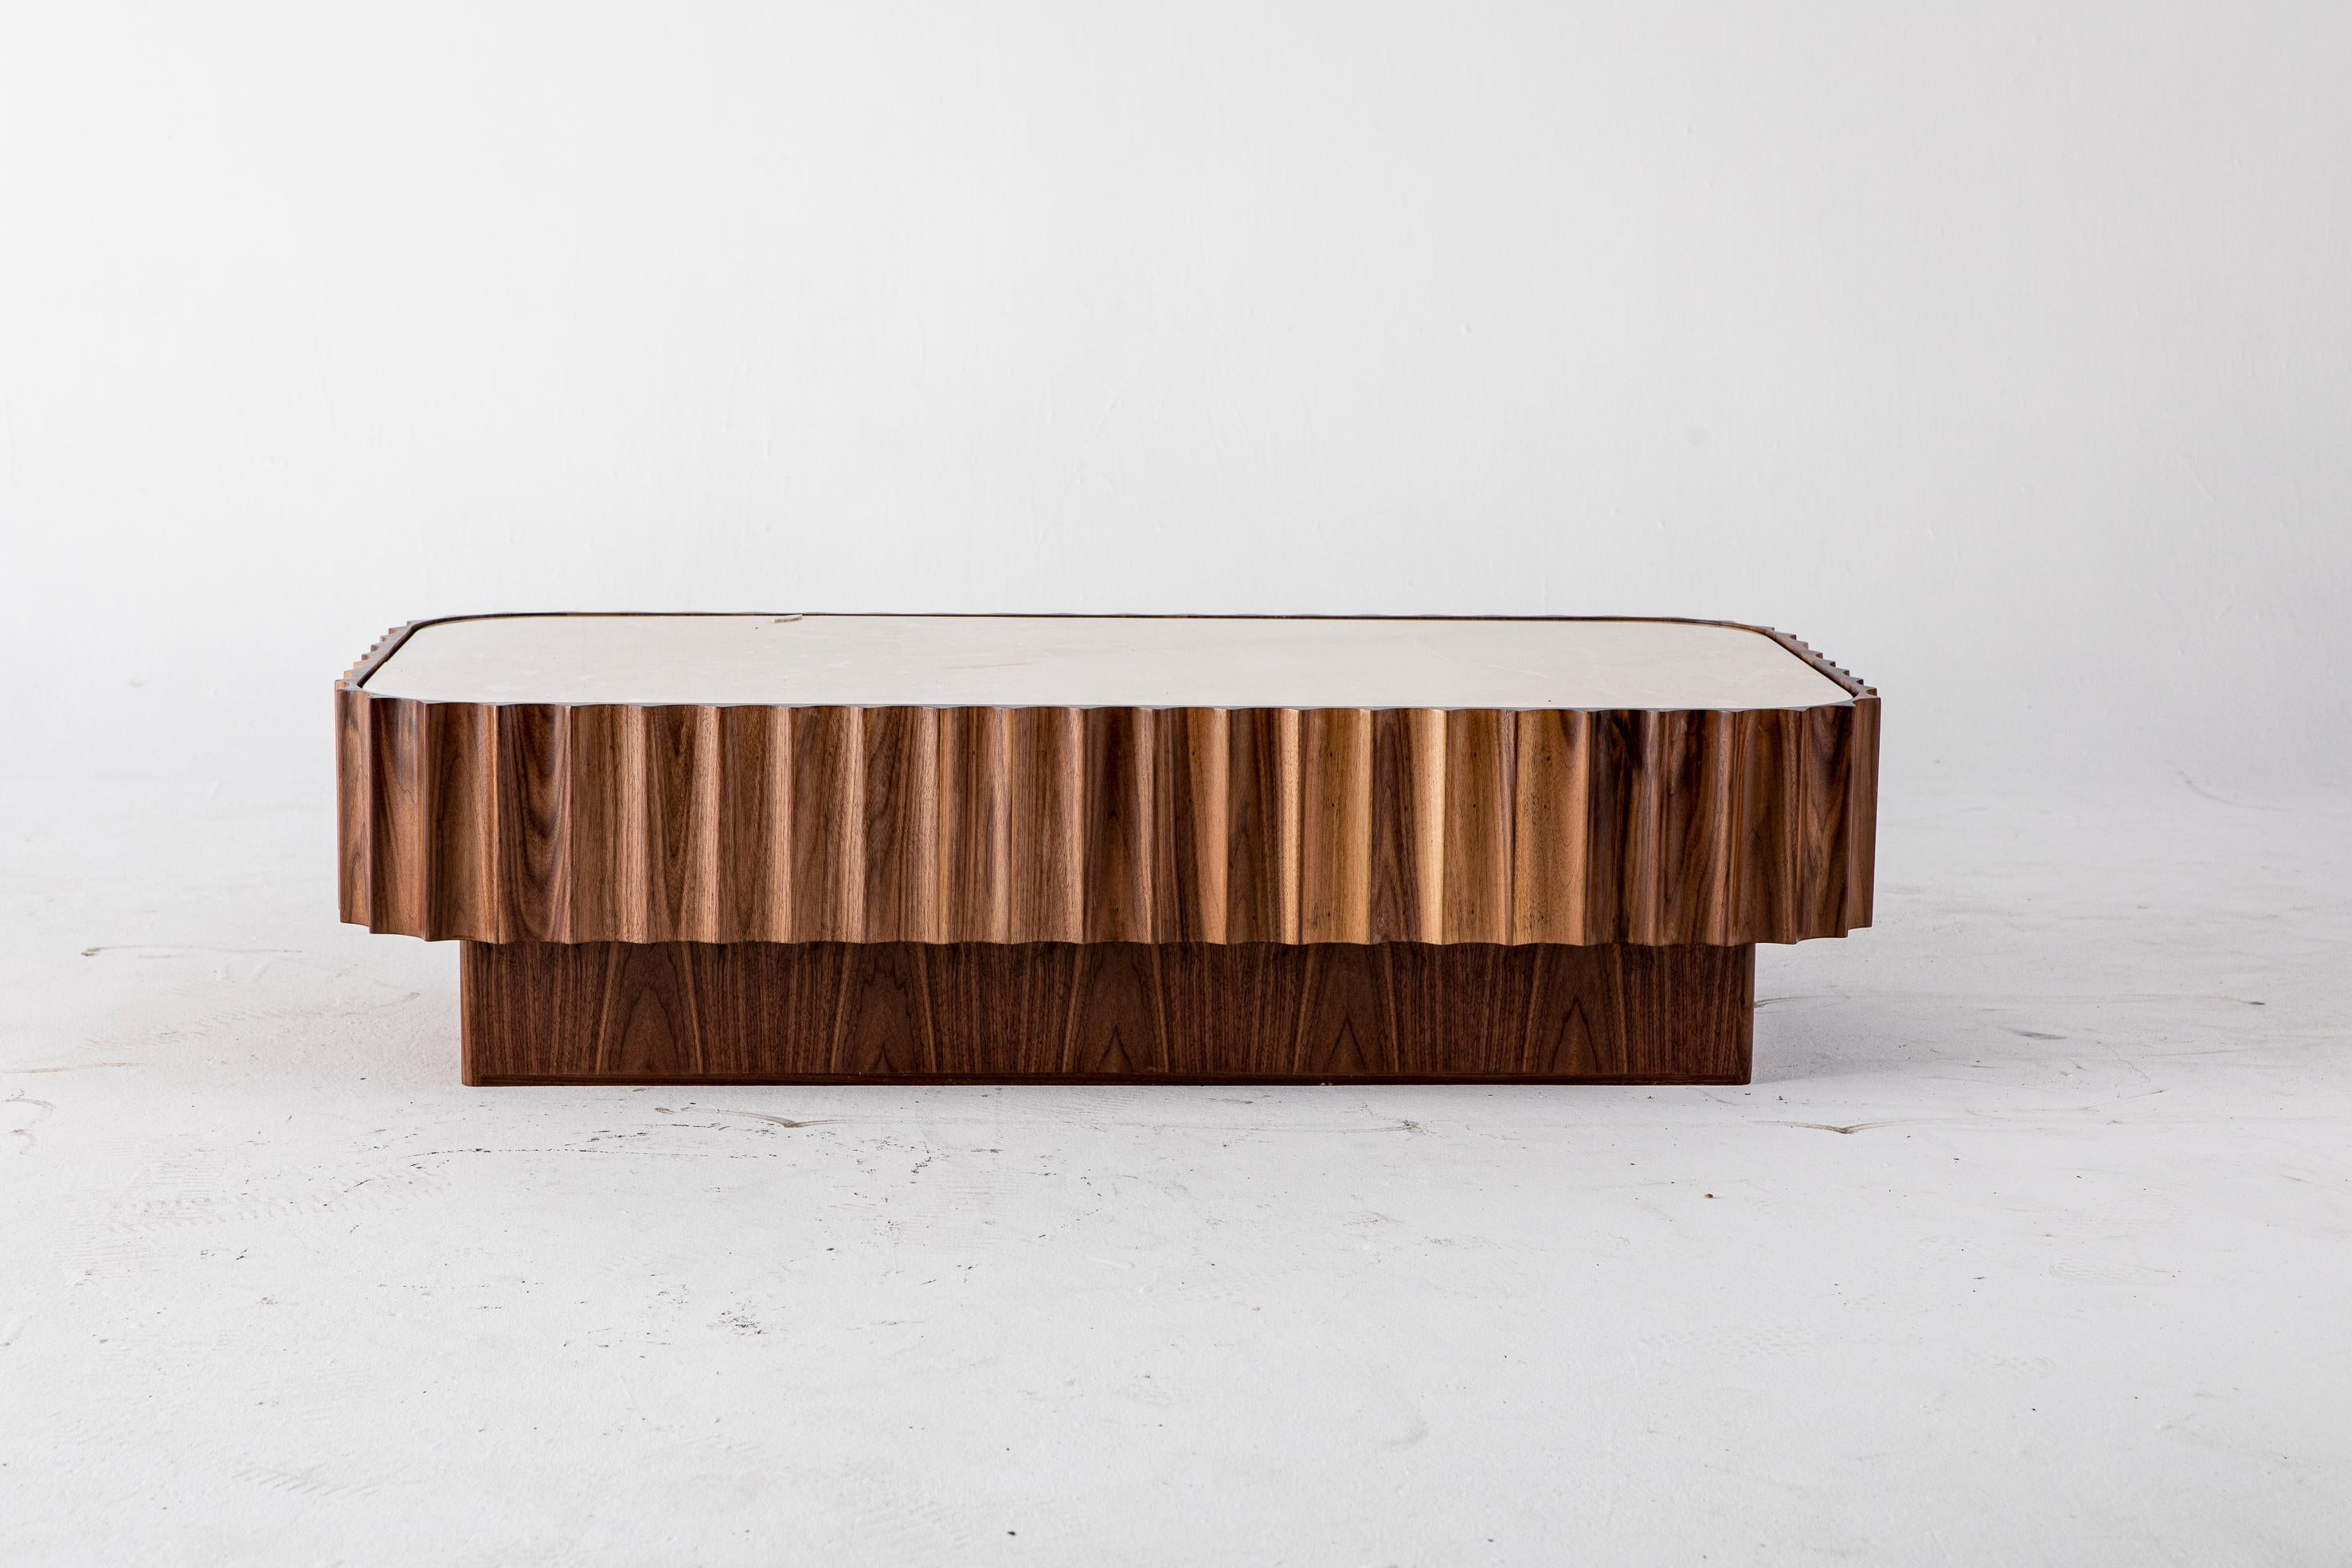 Fluted coffee table by Egg Designs
Dimensions: 140 L X 70 D X 32 H cm
Materials: African Mahogany, Travetine

Founded by South Africans and life partners, Greg and Roche Dry - Egg is a unique perspective in contemporary furniture inspired with a